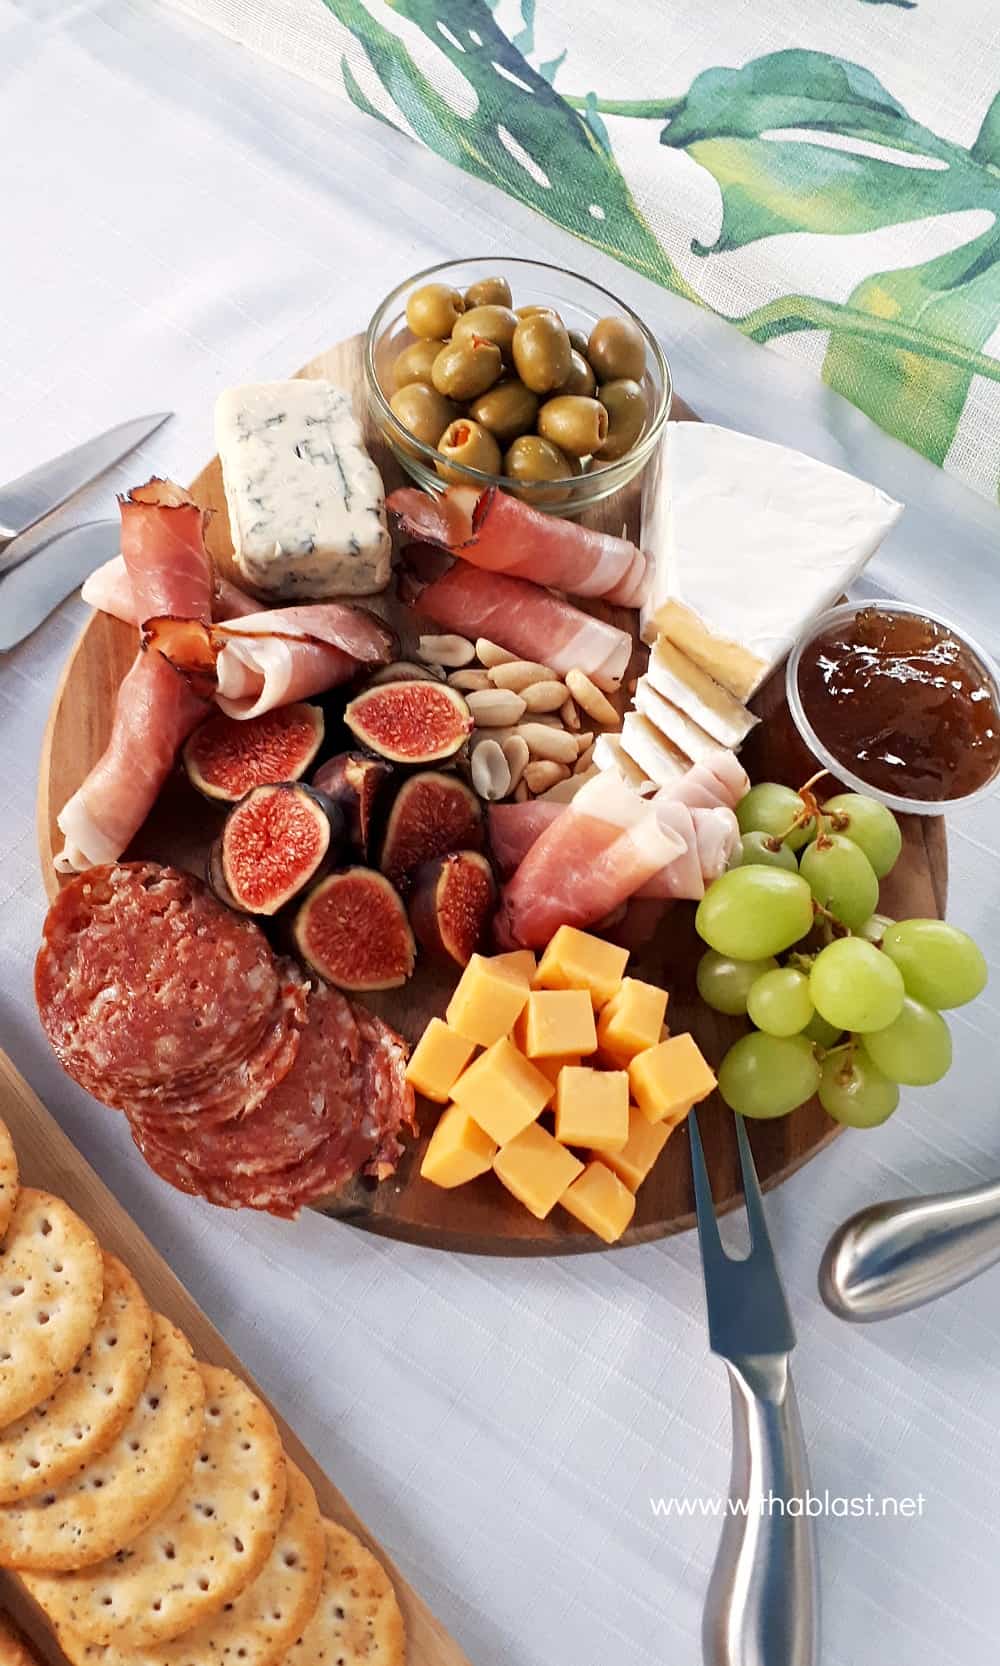 How to make an Easy Charcuterie Board (Cheese Board) within minutes, which you can customize with ingredients you prefer or suits the occasion